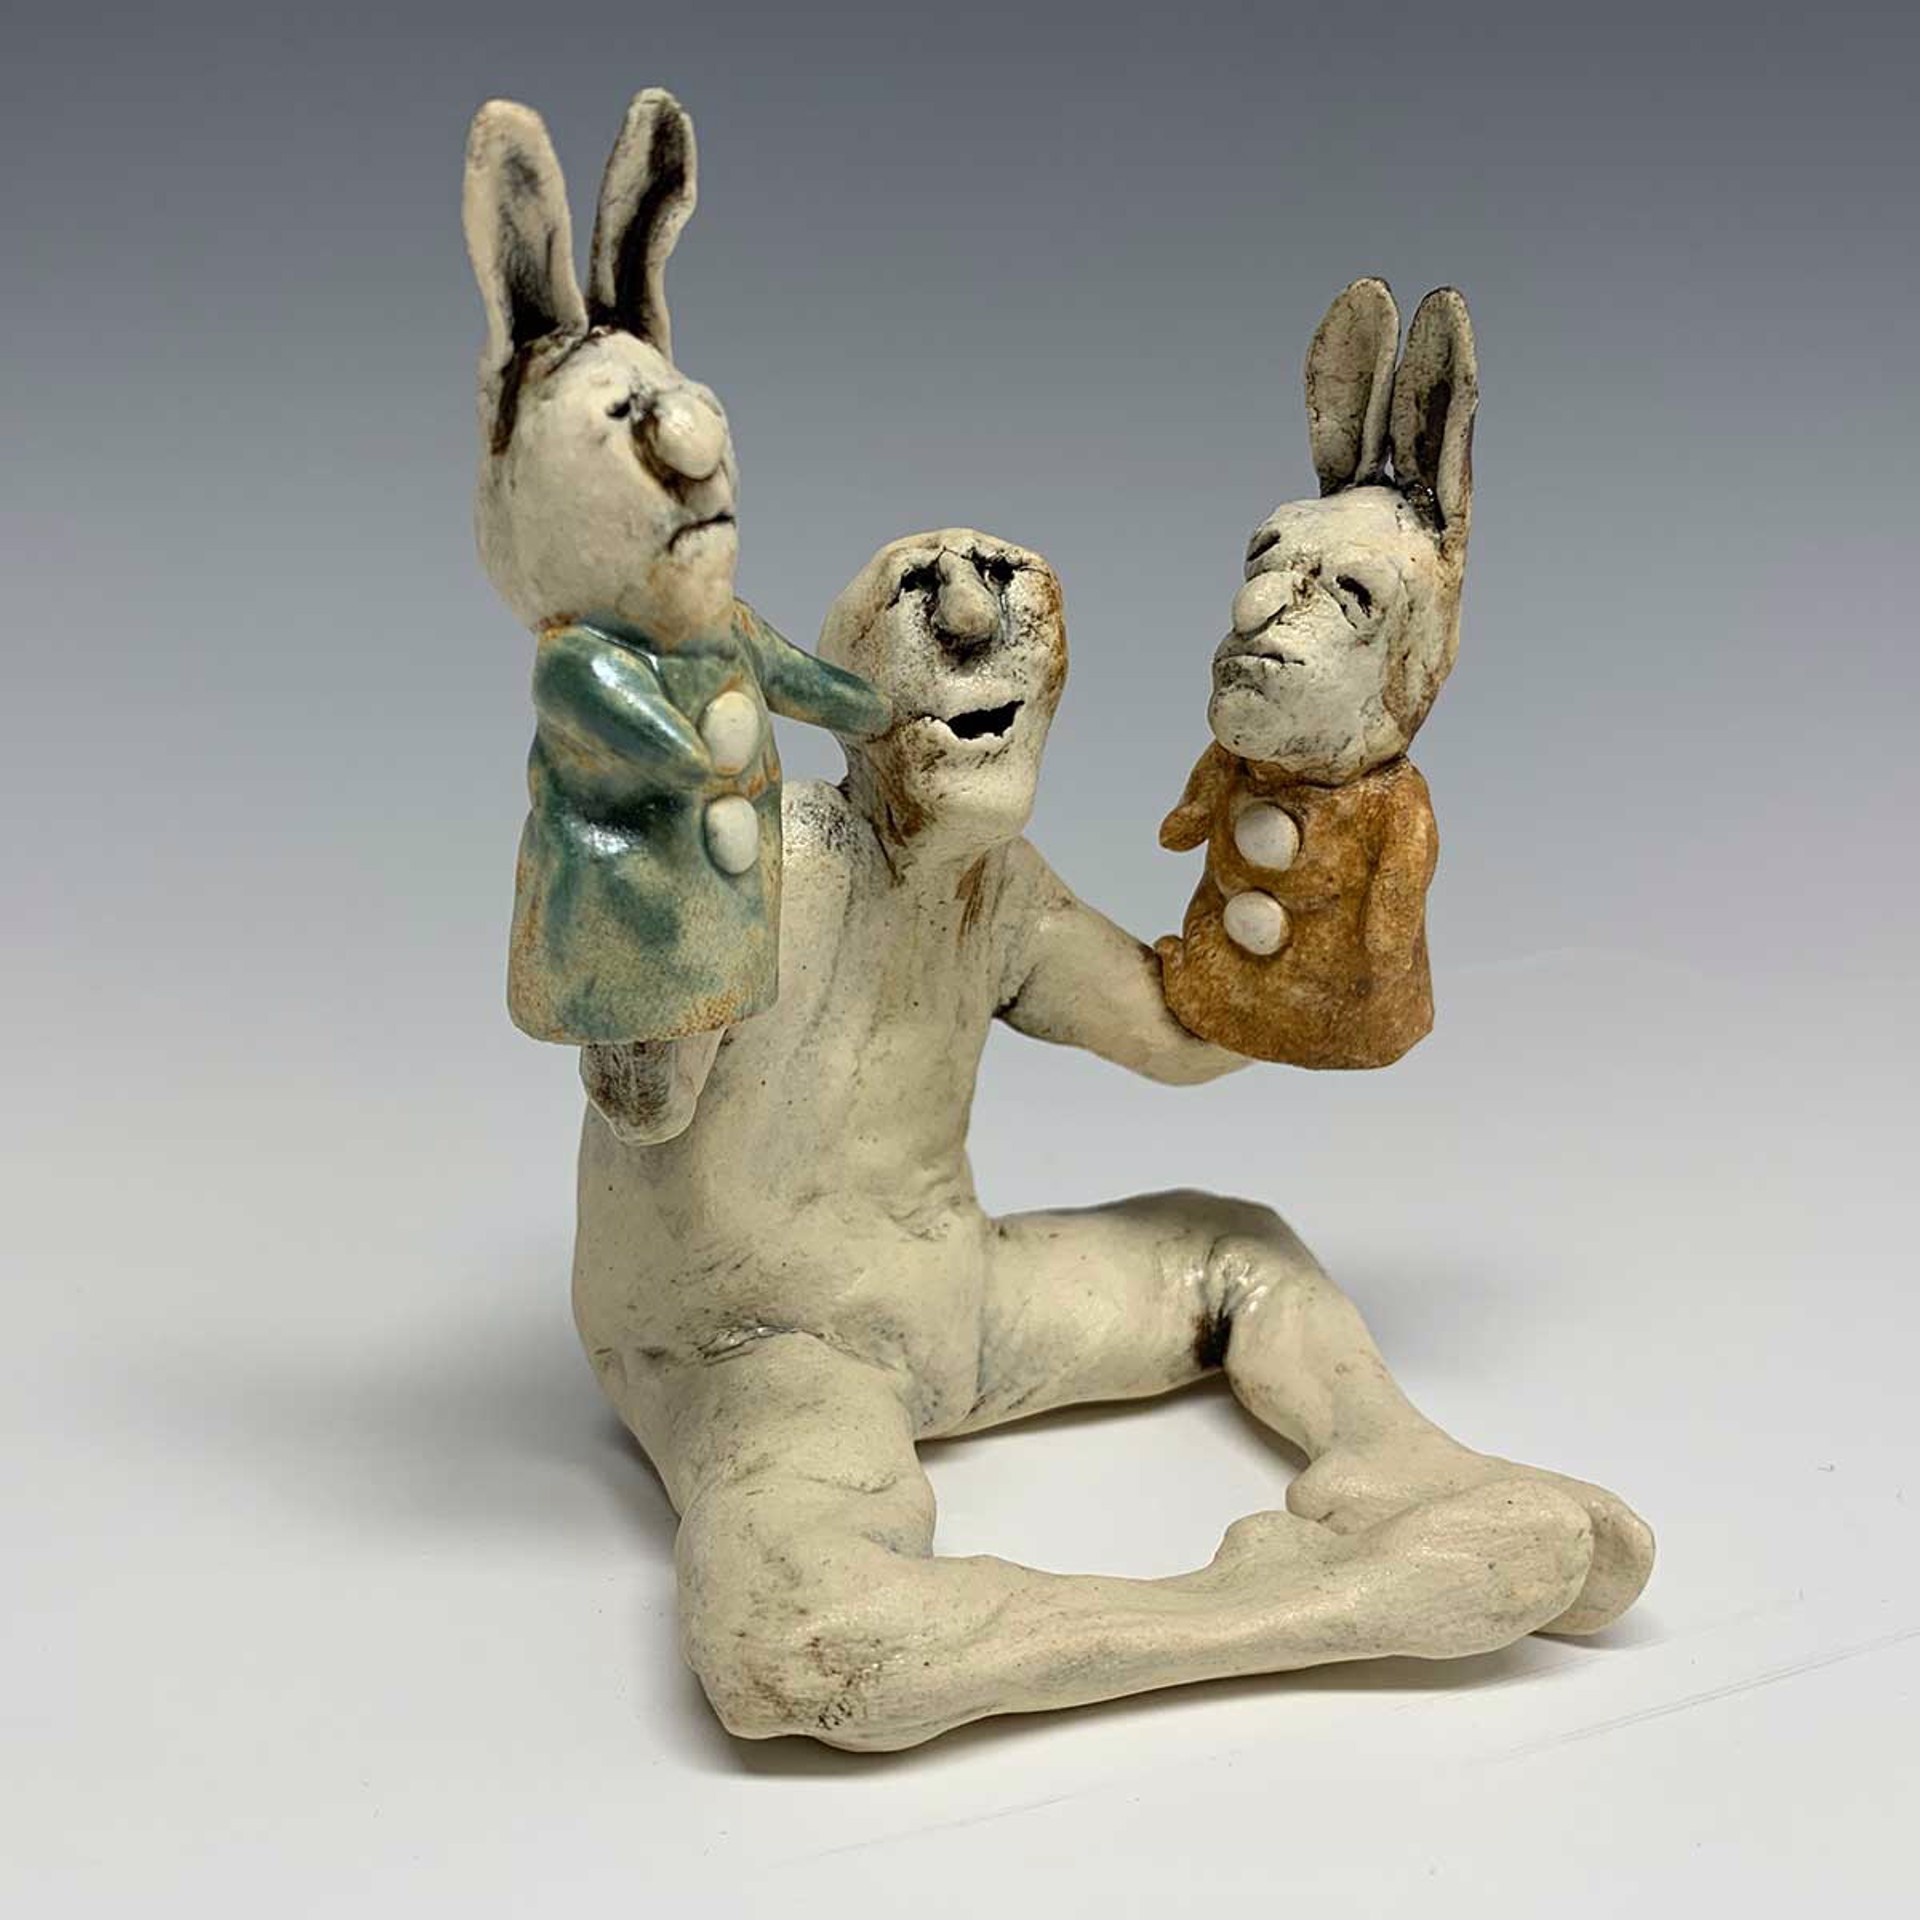 Puppet Man - Two Rabbits by Aggie Zed